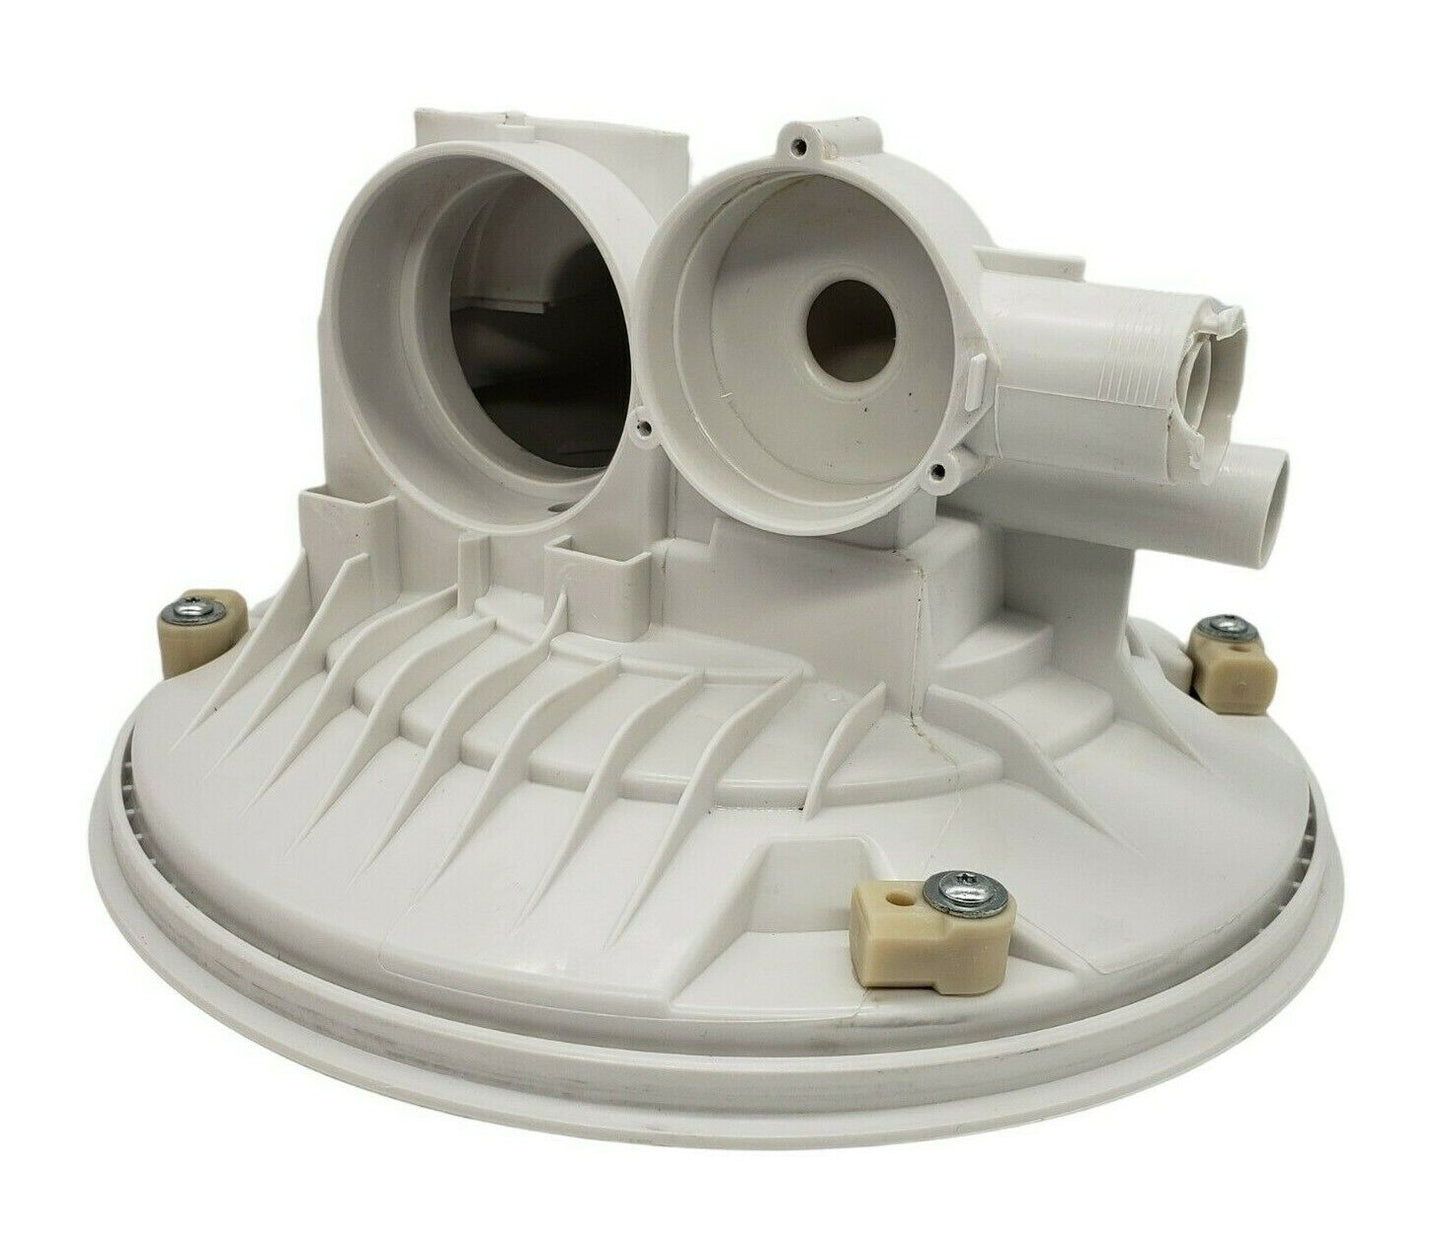 OEM Replacement for Frigidaire Dishwasher Sump 154728201